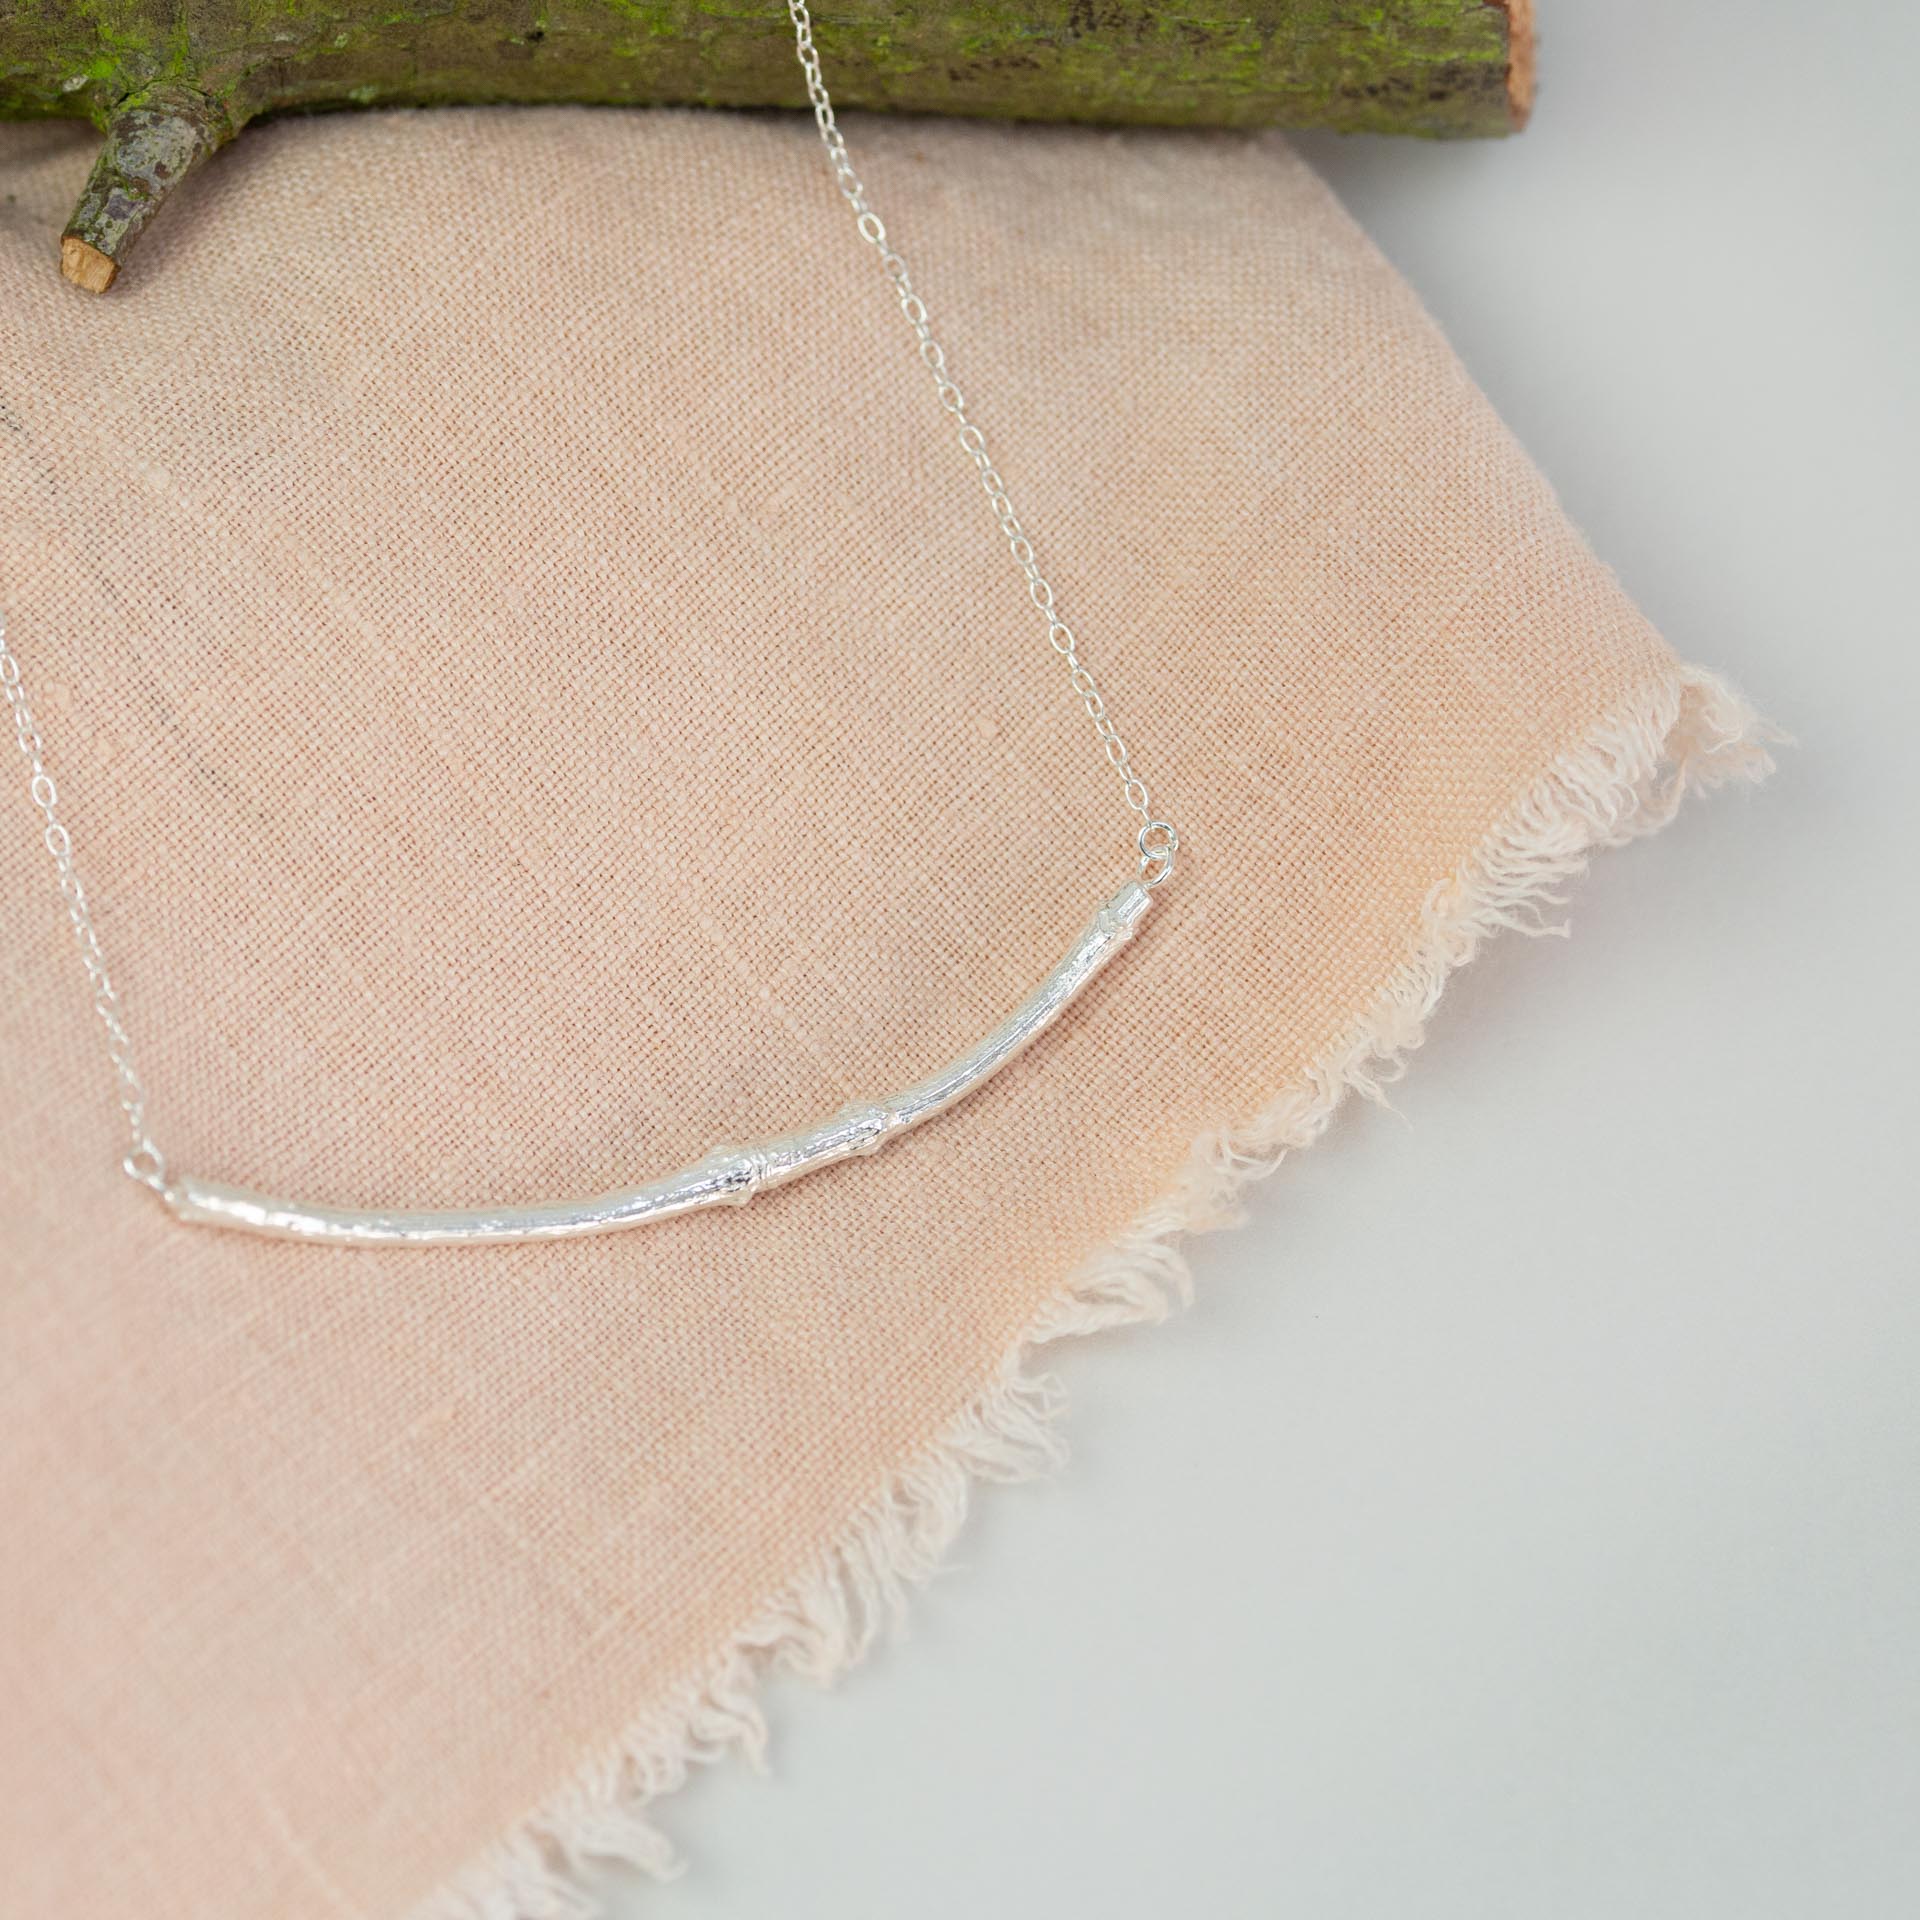 silver smooth twig necklace on pink cloth near wooden branch